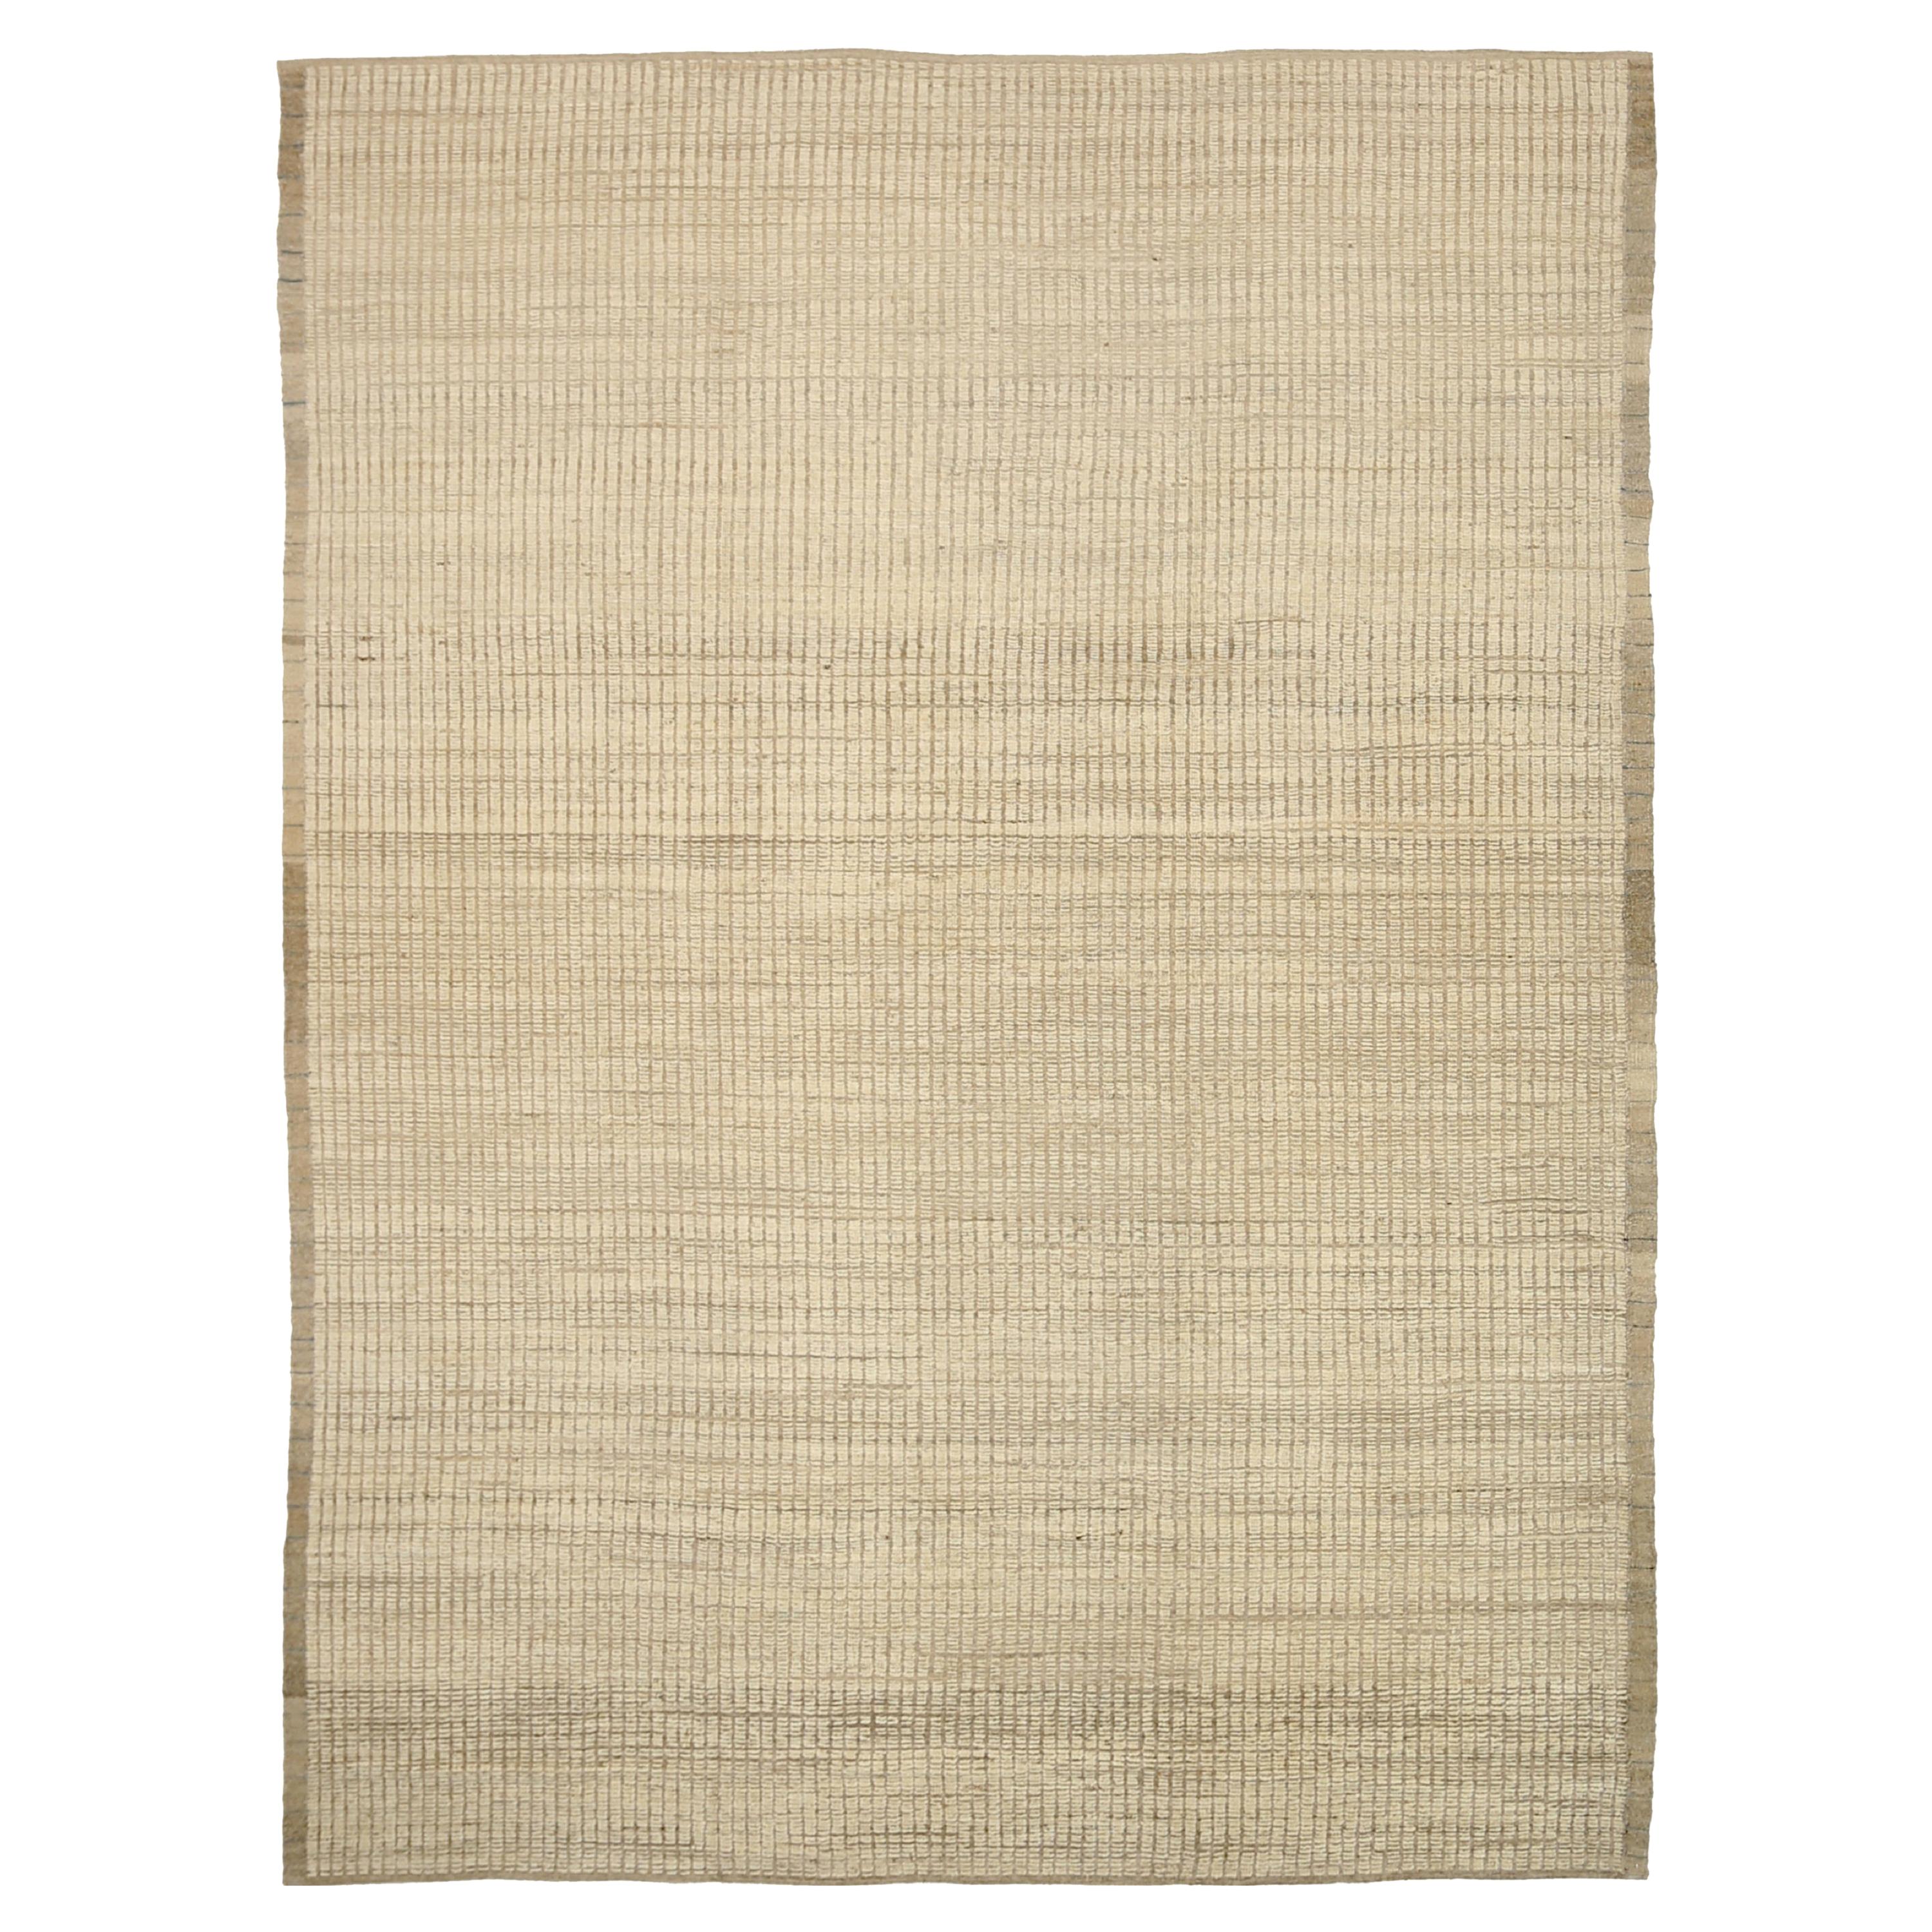 Nazmiyal Collection Beige Color Modern Distressed Rug. 10 ft 4 in x 13 ft 7 in